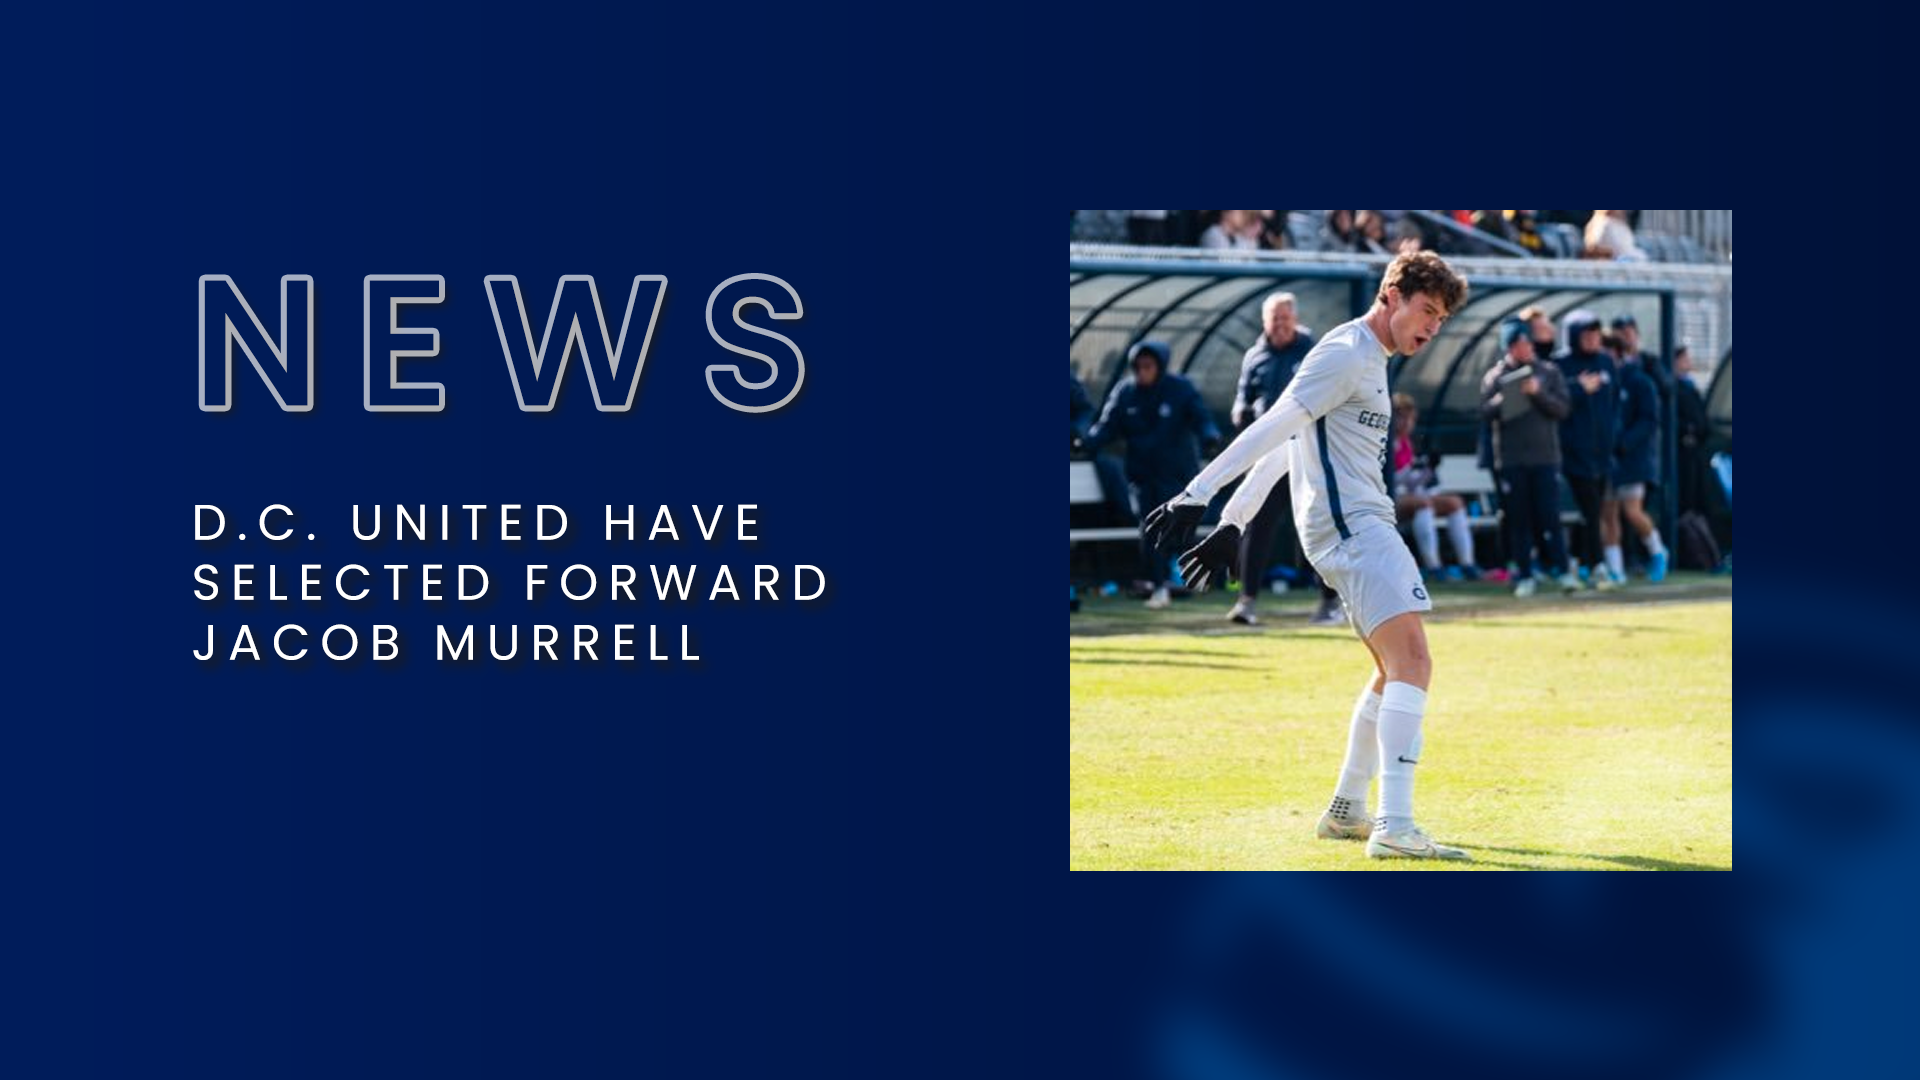 D.C. United have selected forward Jacob Murrell